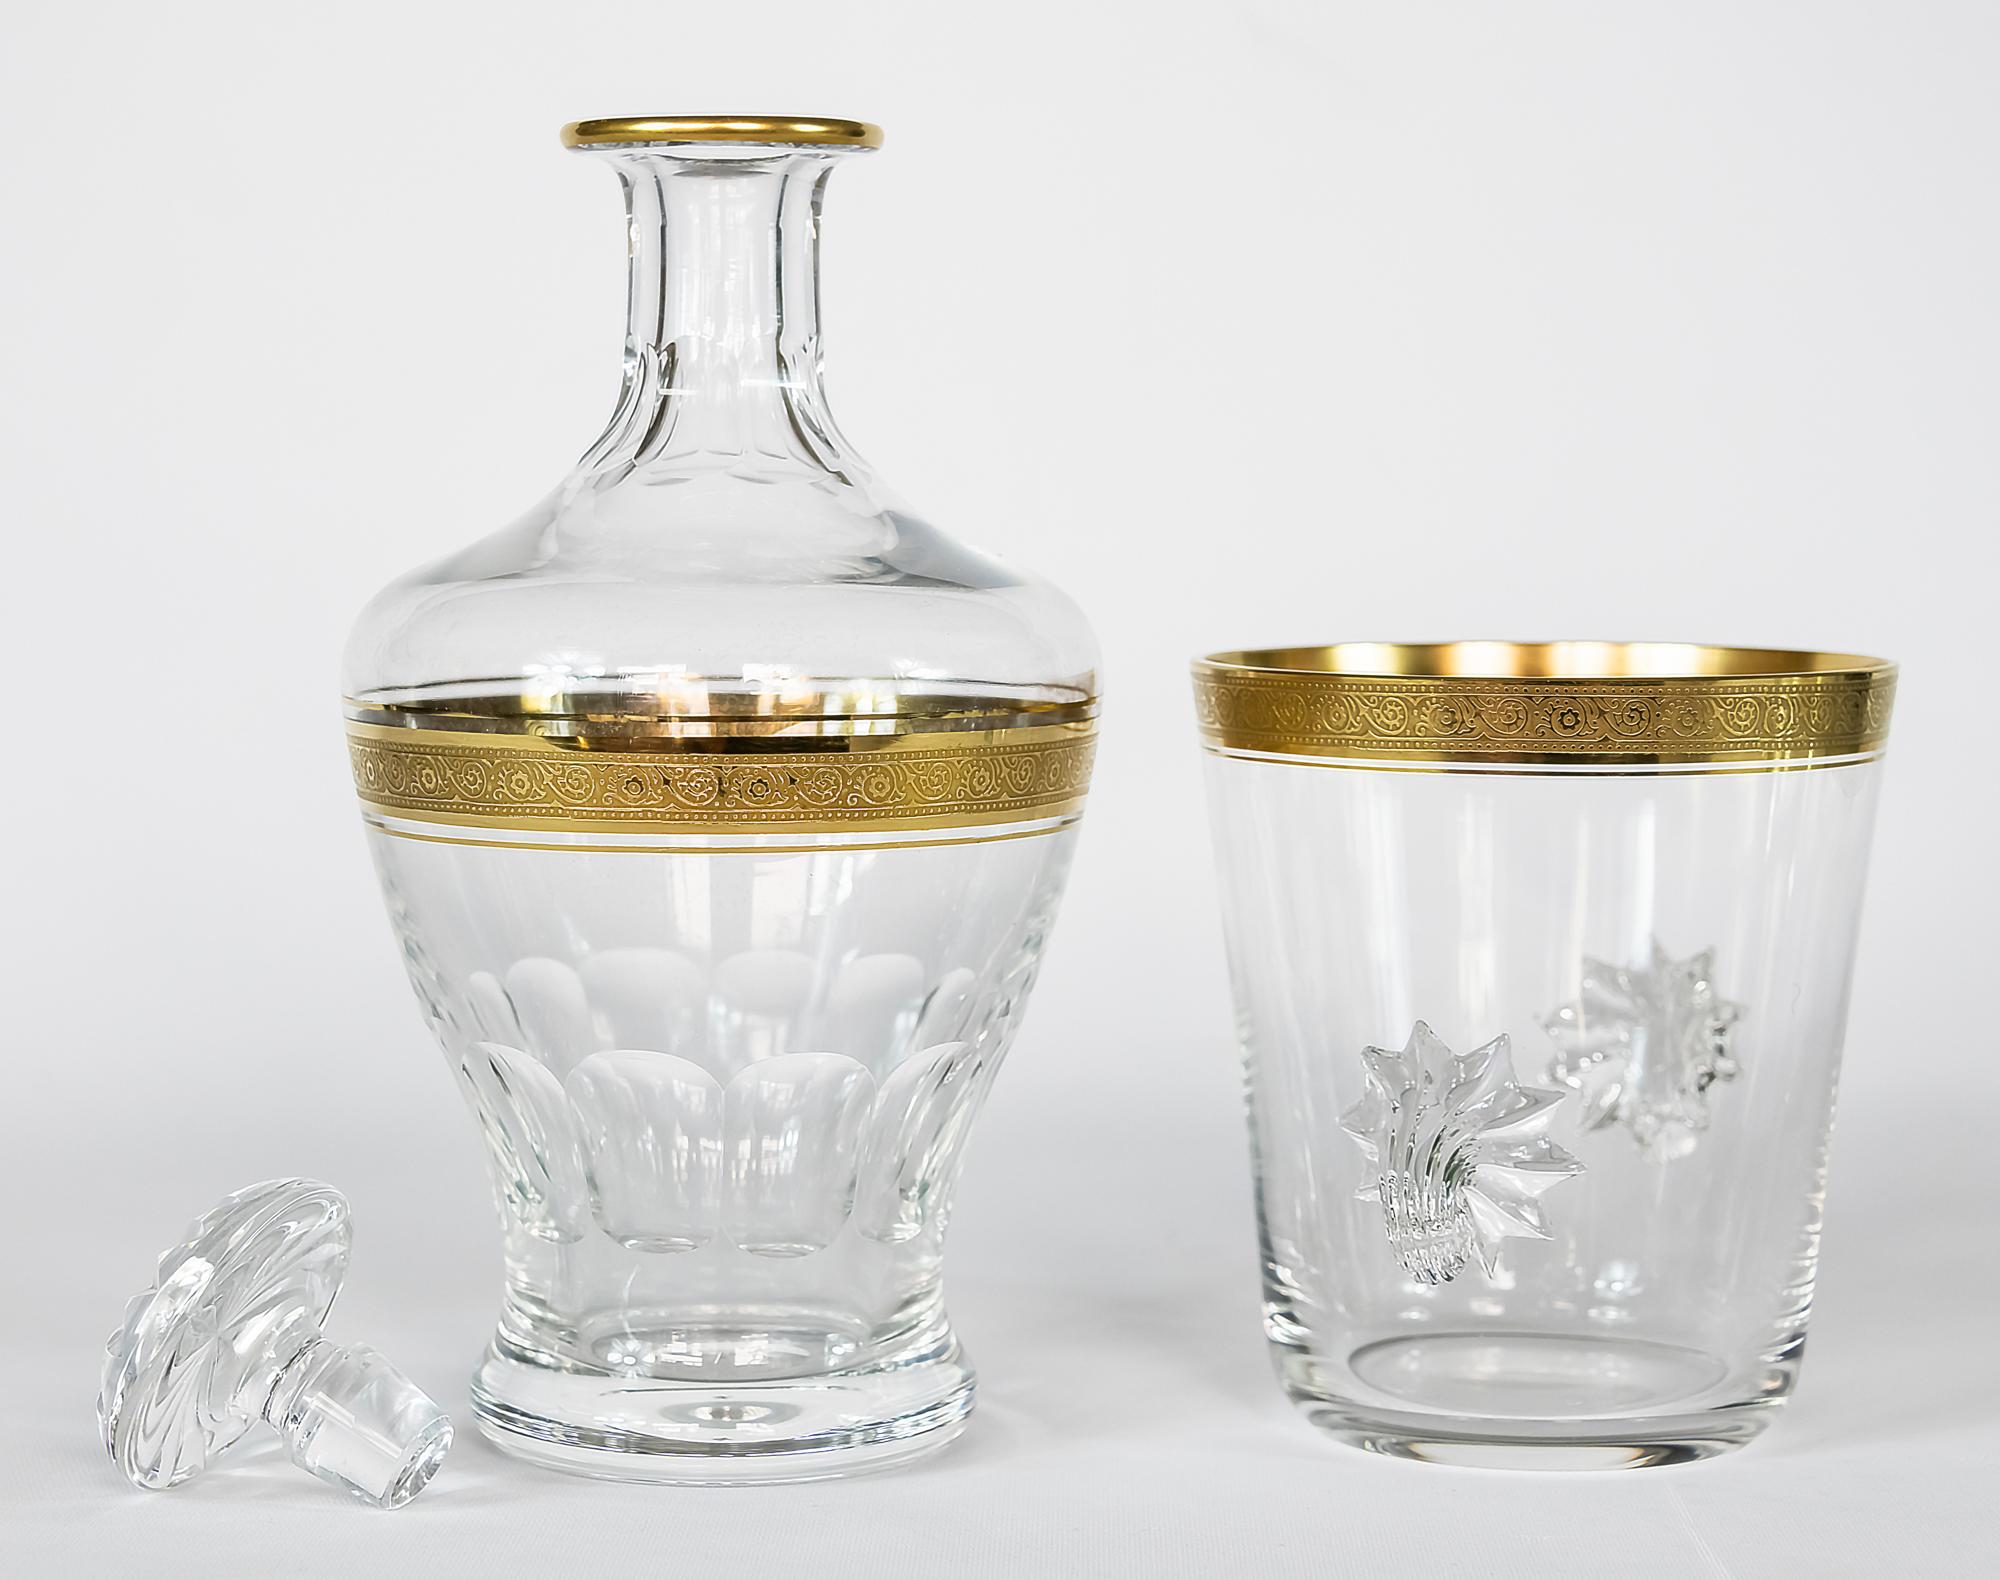 Late 20th Century Set of Glass Carafe/Decanter and Ice Bucket Concord Collection by Theresiethal